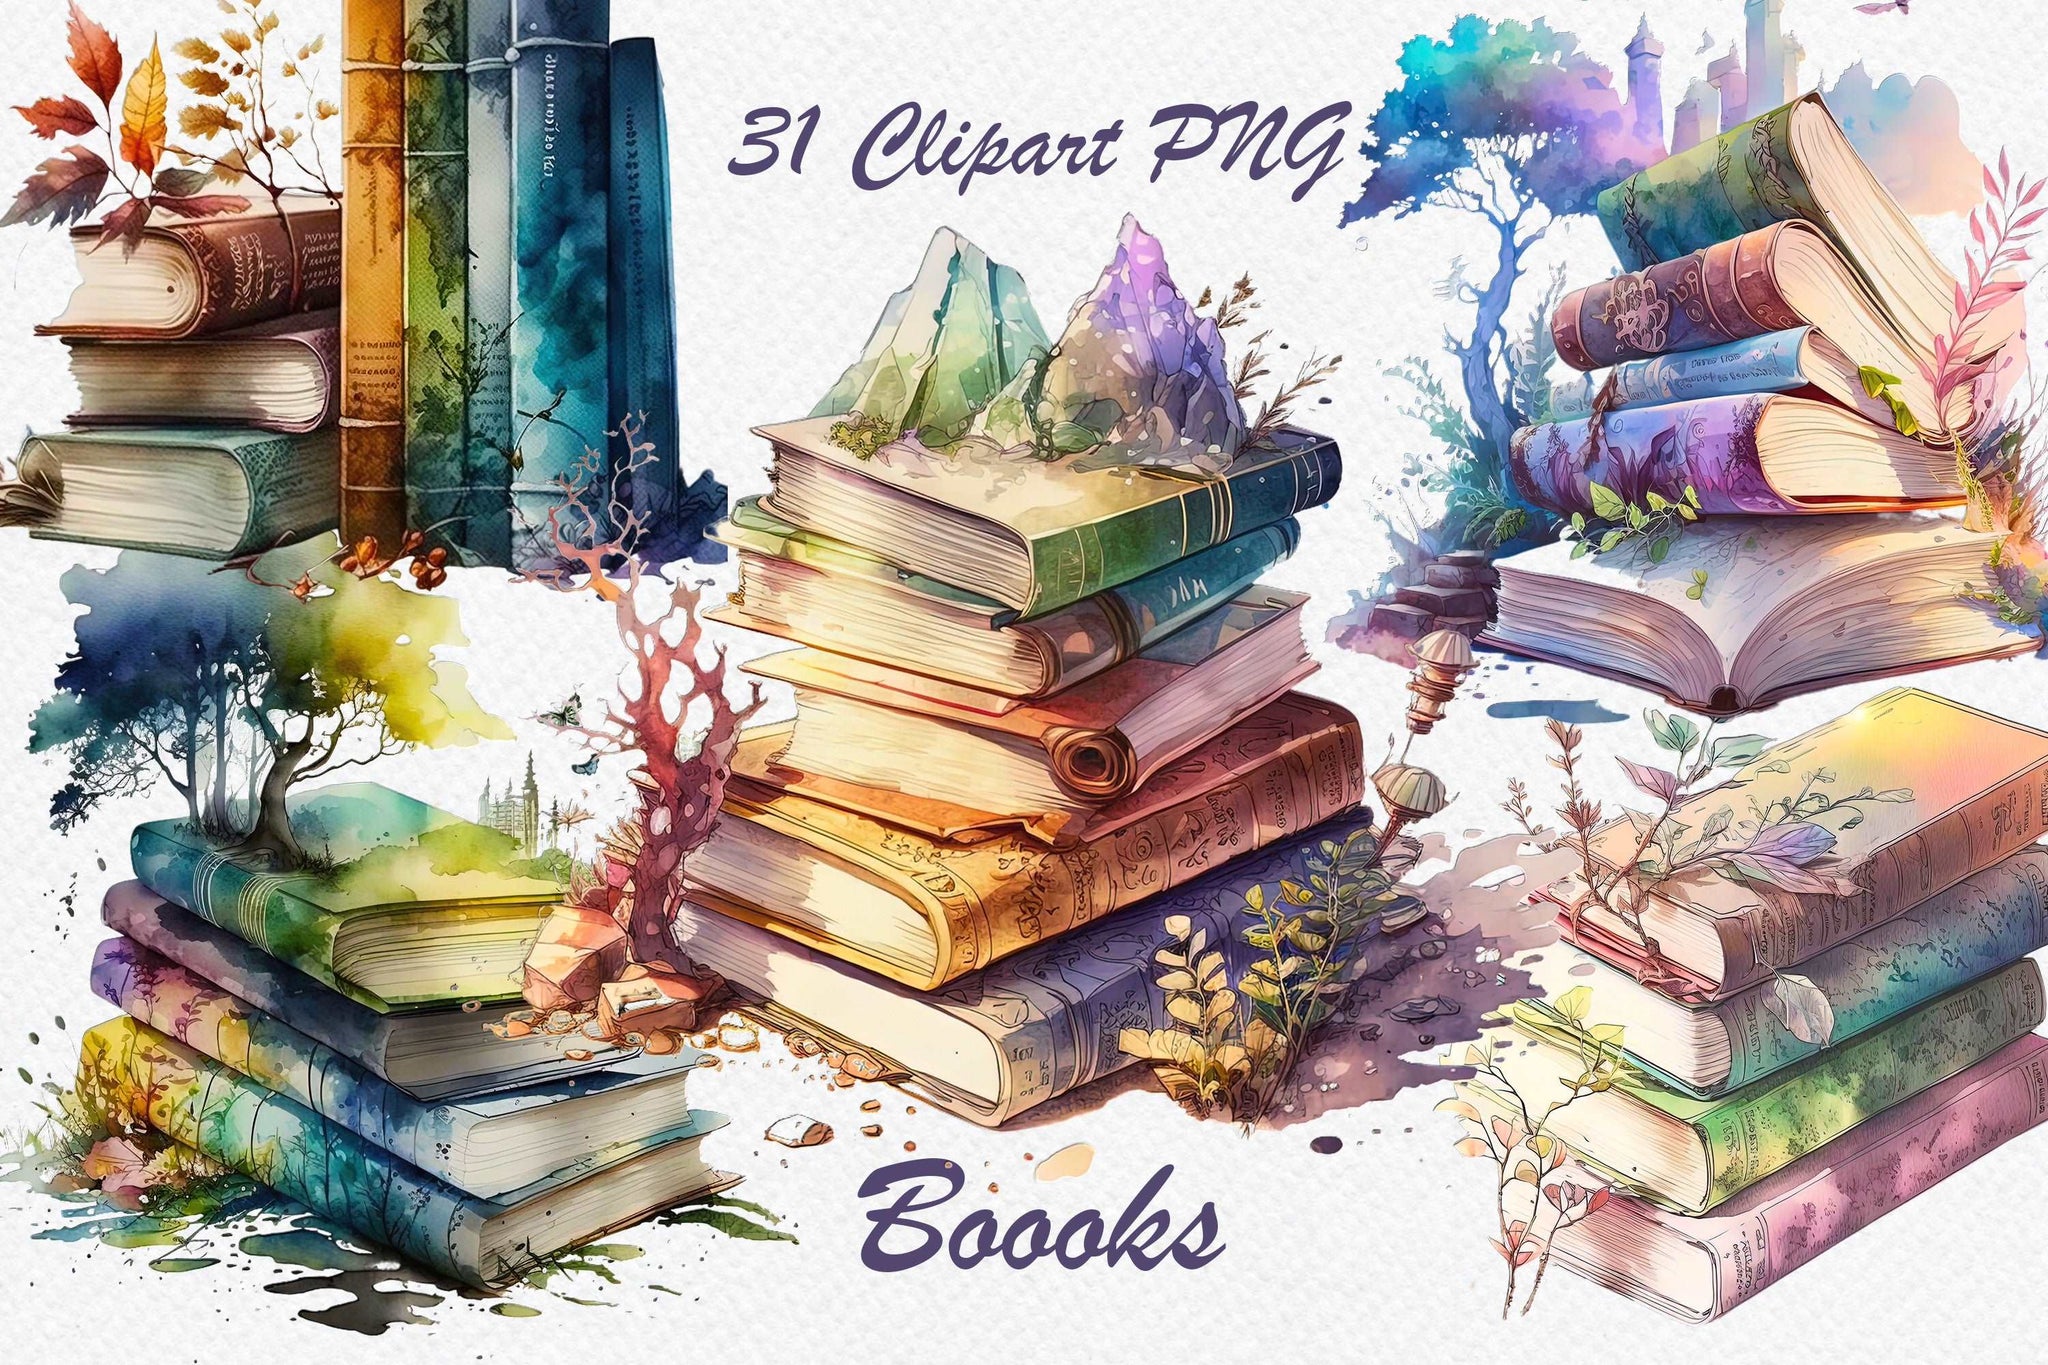 Book clipart, books bundle, reading clipart, library clipart, old books. Retro scrapbooking. Digital watercolor. png. Free commercial use.